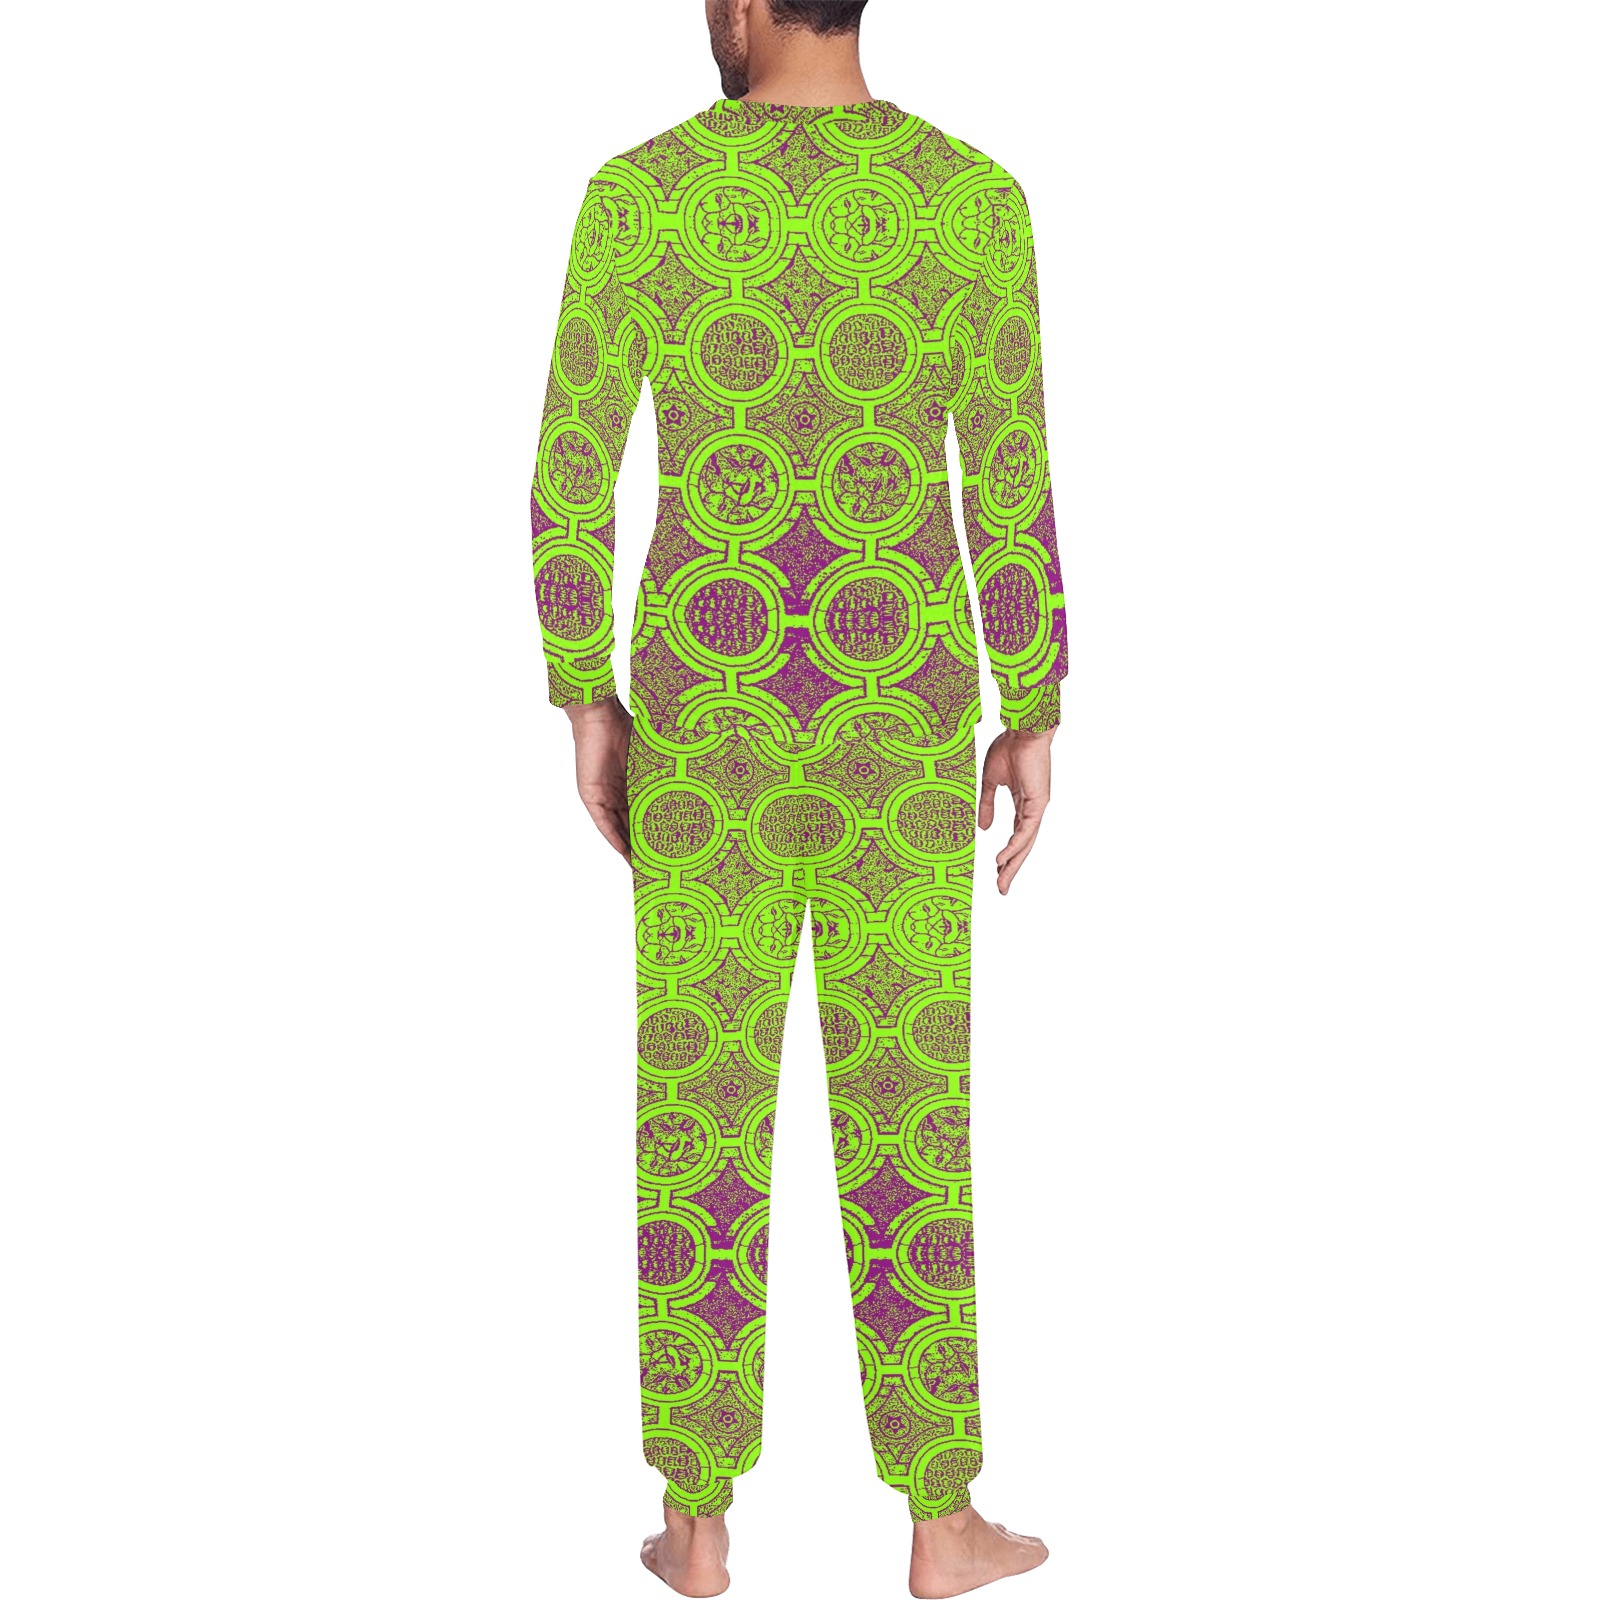 AFRICAN PRINT PATTERN 2 Men's All Over Print Pajama Set with Custom Cuff